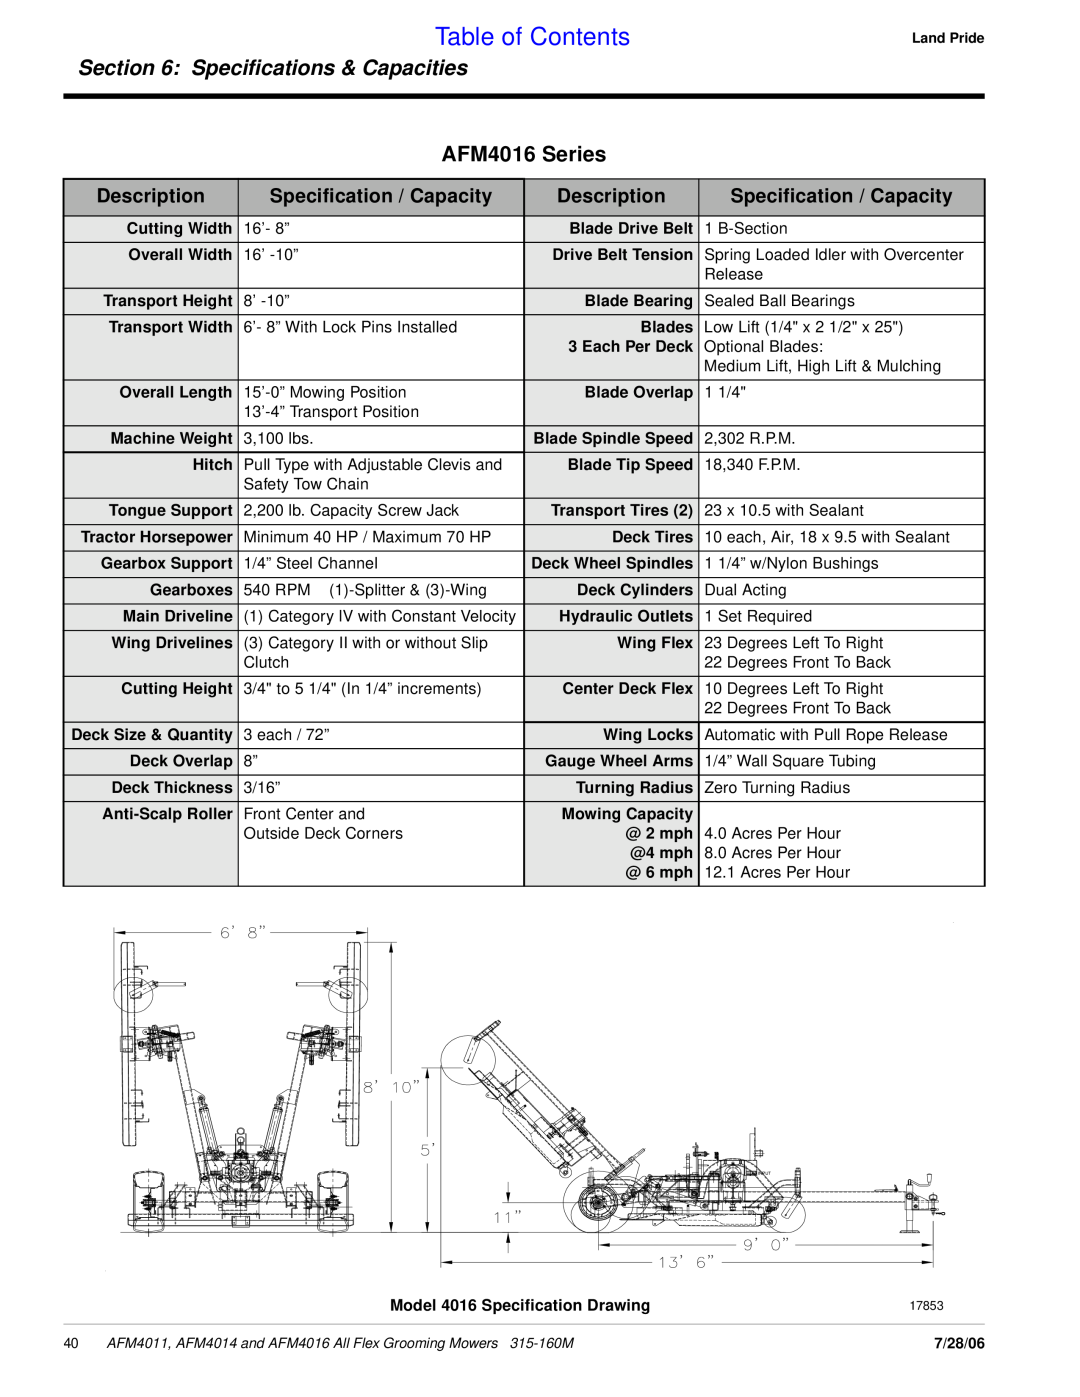 Land Pride manual Table of Contents, Speciﬁcations & Capacities, AFM4016 Series, Description, Specification / Capacity 